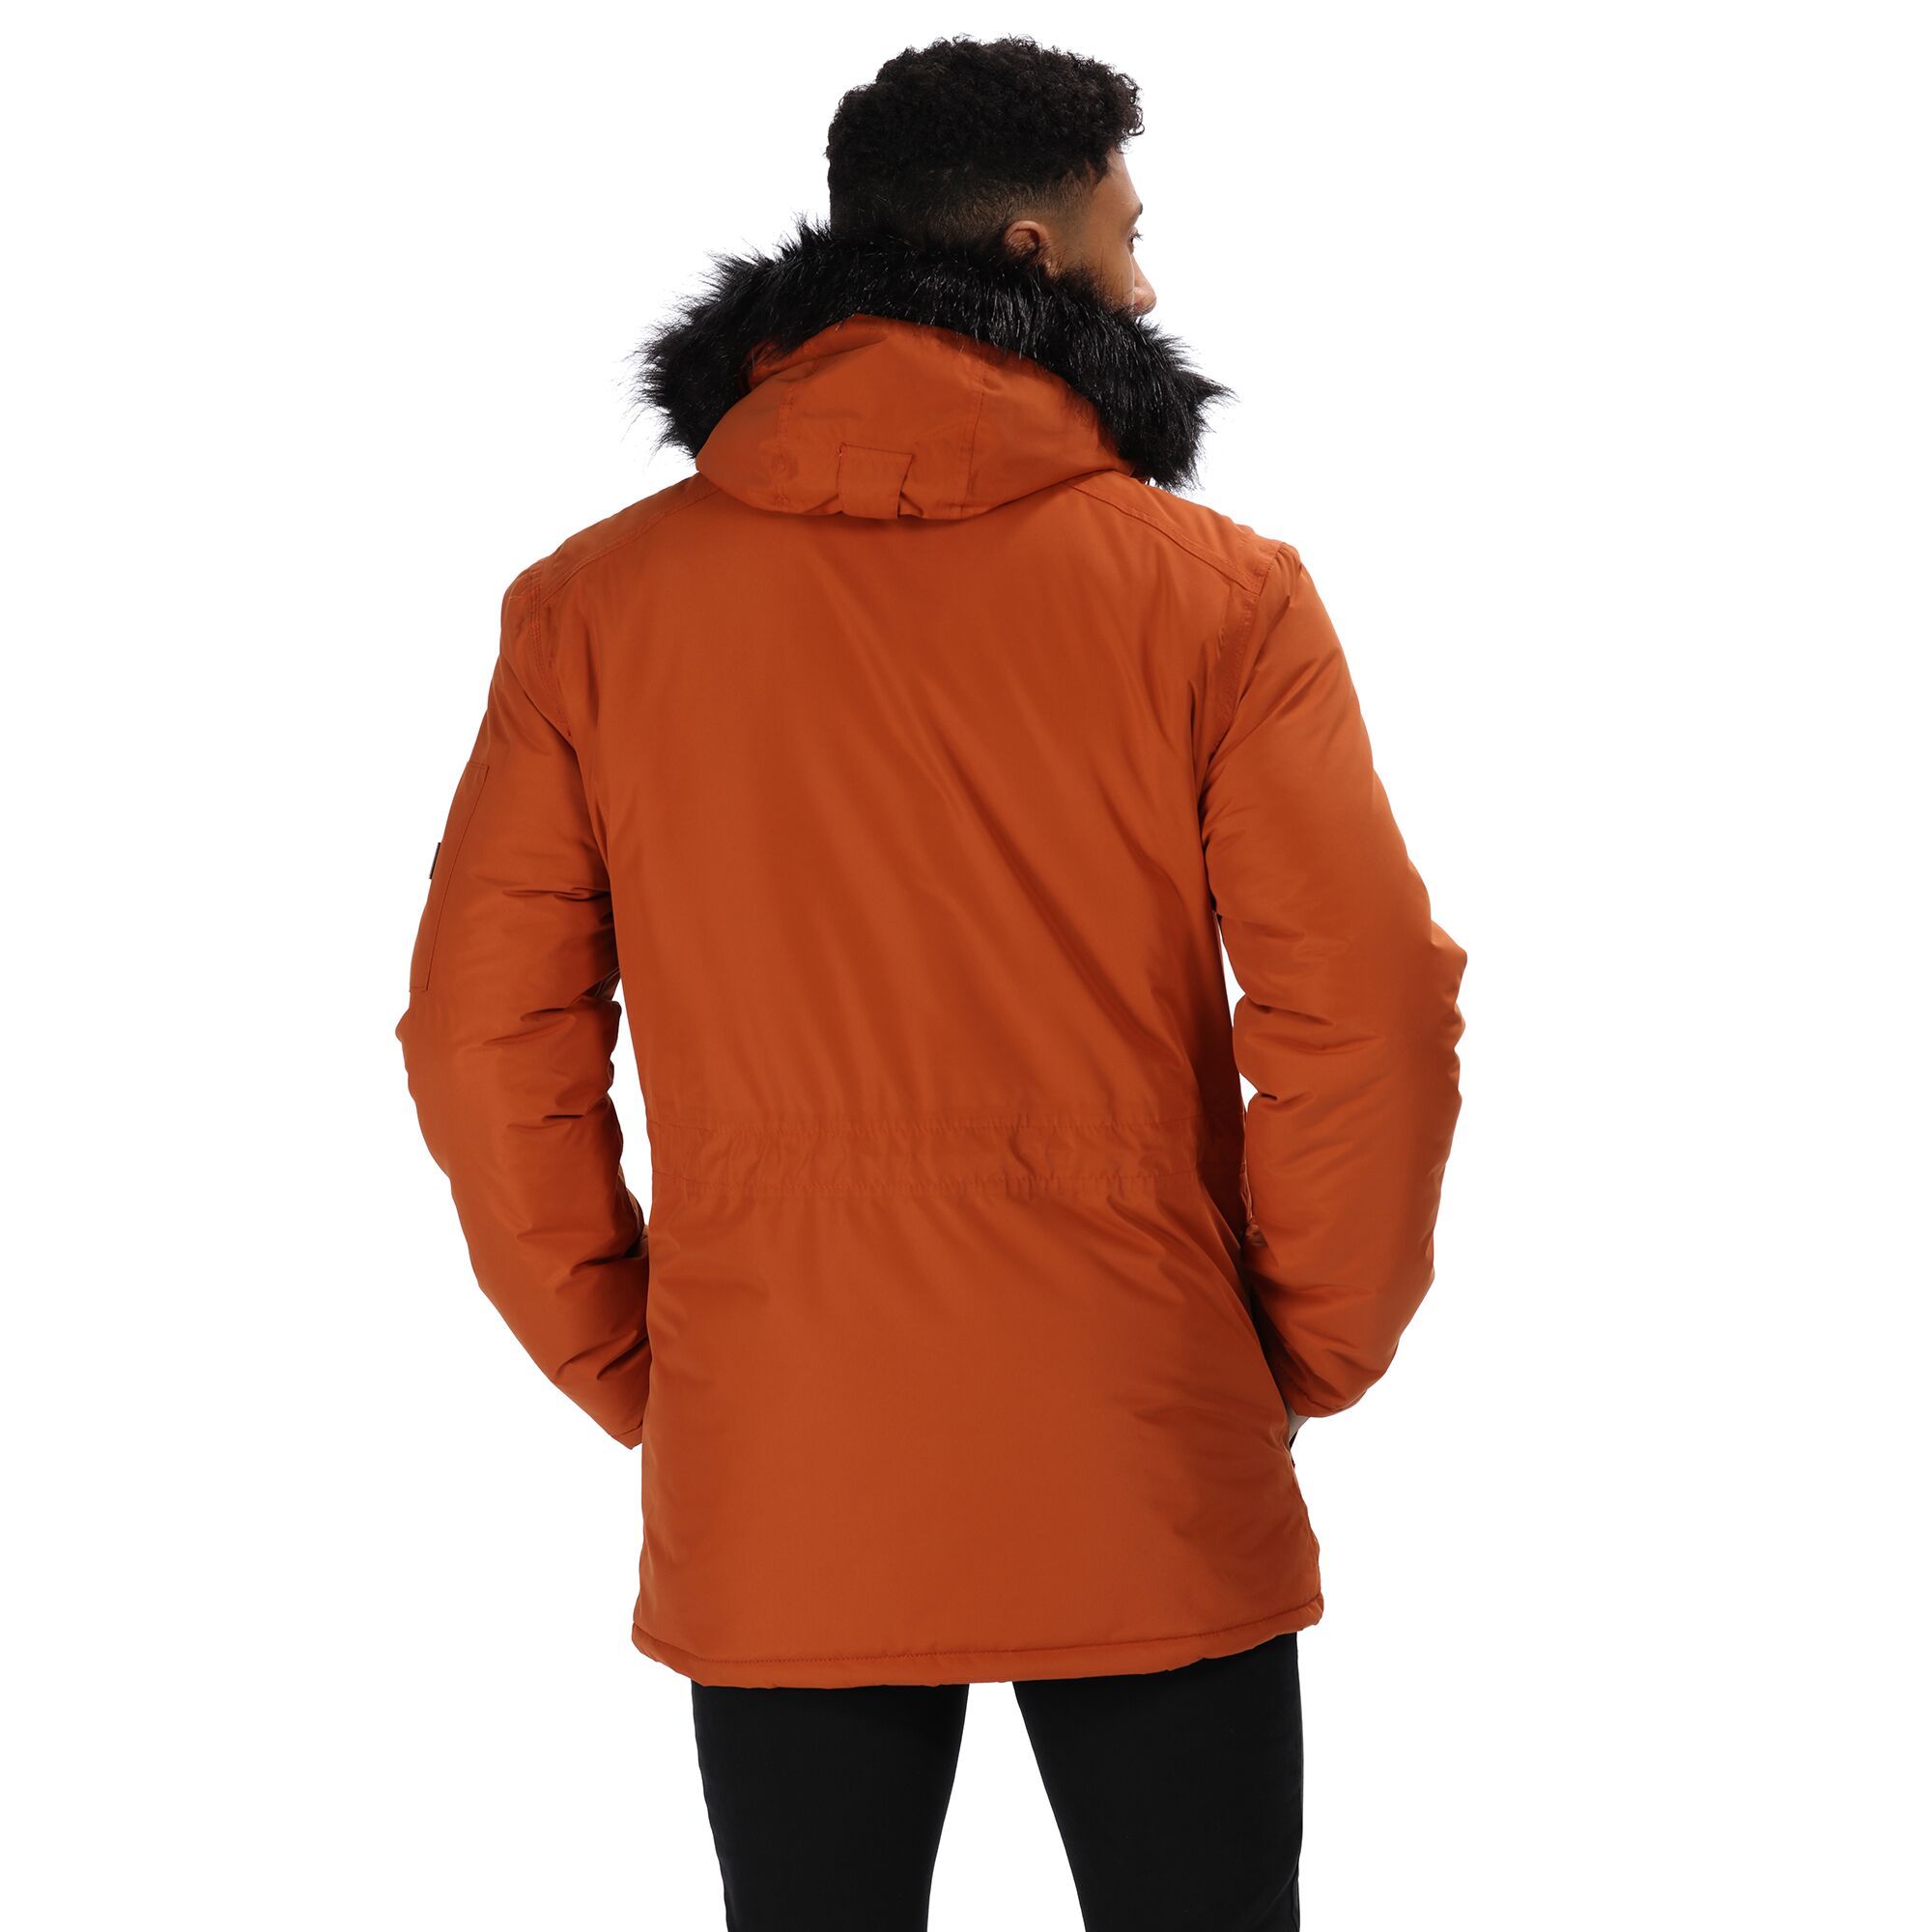 Mens hooded jacket made of waterproof and breathable Isotex 5000 peached Polyester fabric. Taped seams. Durable water repellent finish. Thermo-Guard insulation. Polyester taffeta lining with strategic quilt to back panel and hood. Printed checked lining. Internal zipped security pocket. Grown on hood with adjuster and removable faux fur trim. 2 way centre front zip. Zipped pocket to sleeve. Adjustable cuffs. Internal stormcuffs. 2 handwarmer pockets to chest. Adjustable shockcord waist. 2 lower patch pockets with handwarmer pockets behind. Ideal for wearing outdoors on a cold day. 100% Polyester.